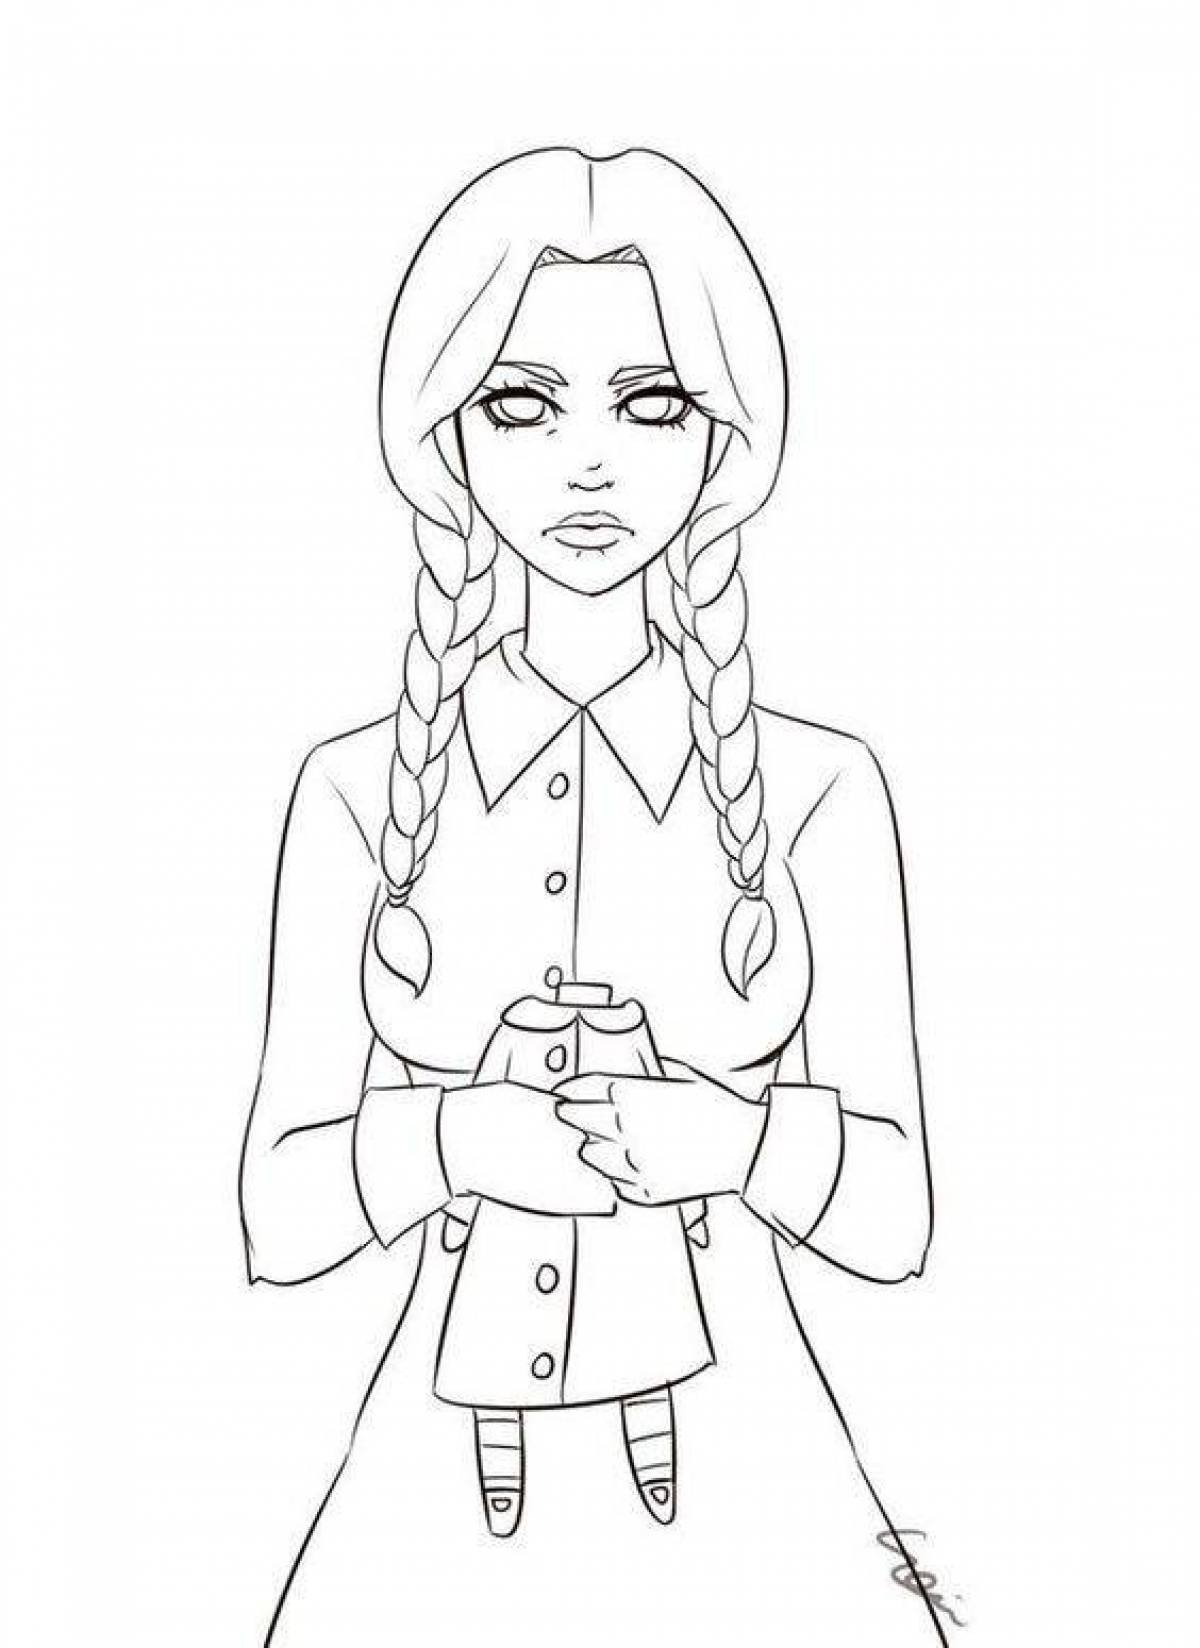 Glowing Wednesday 2022 Coloring Page